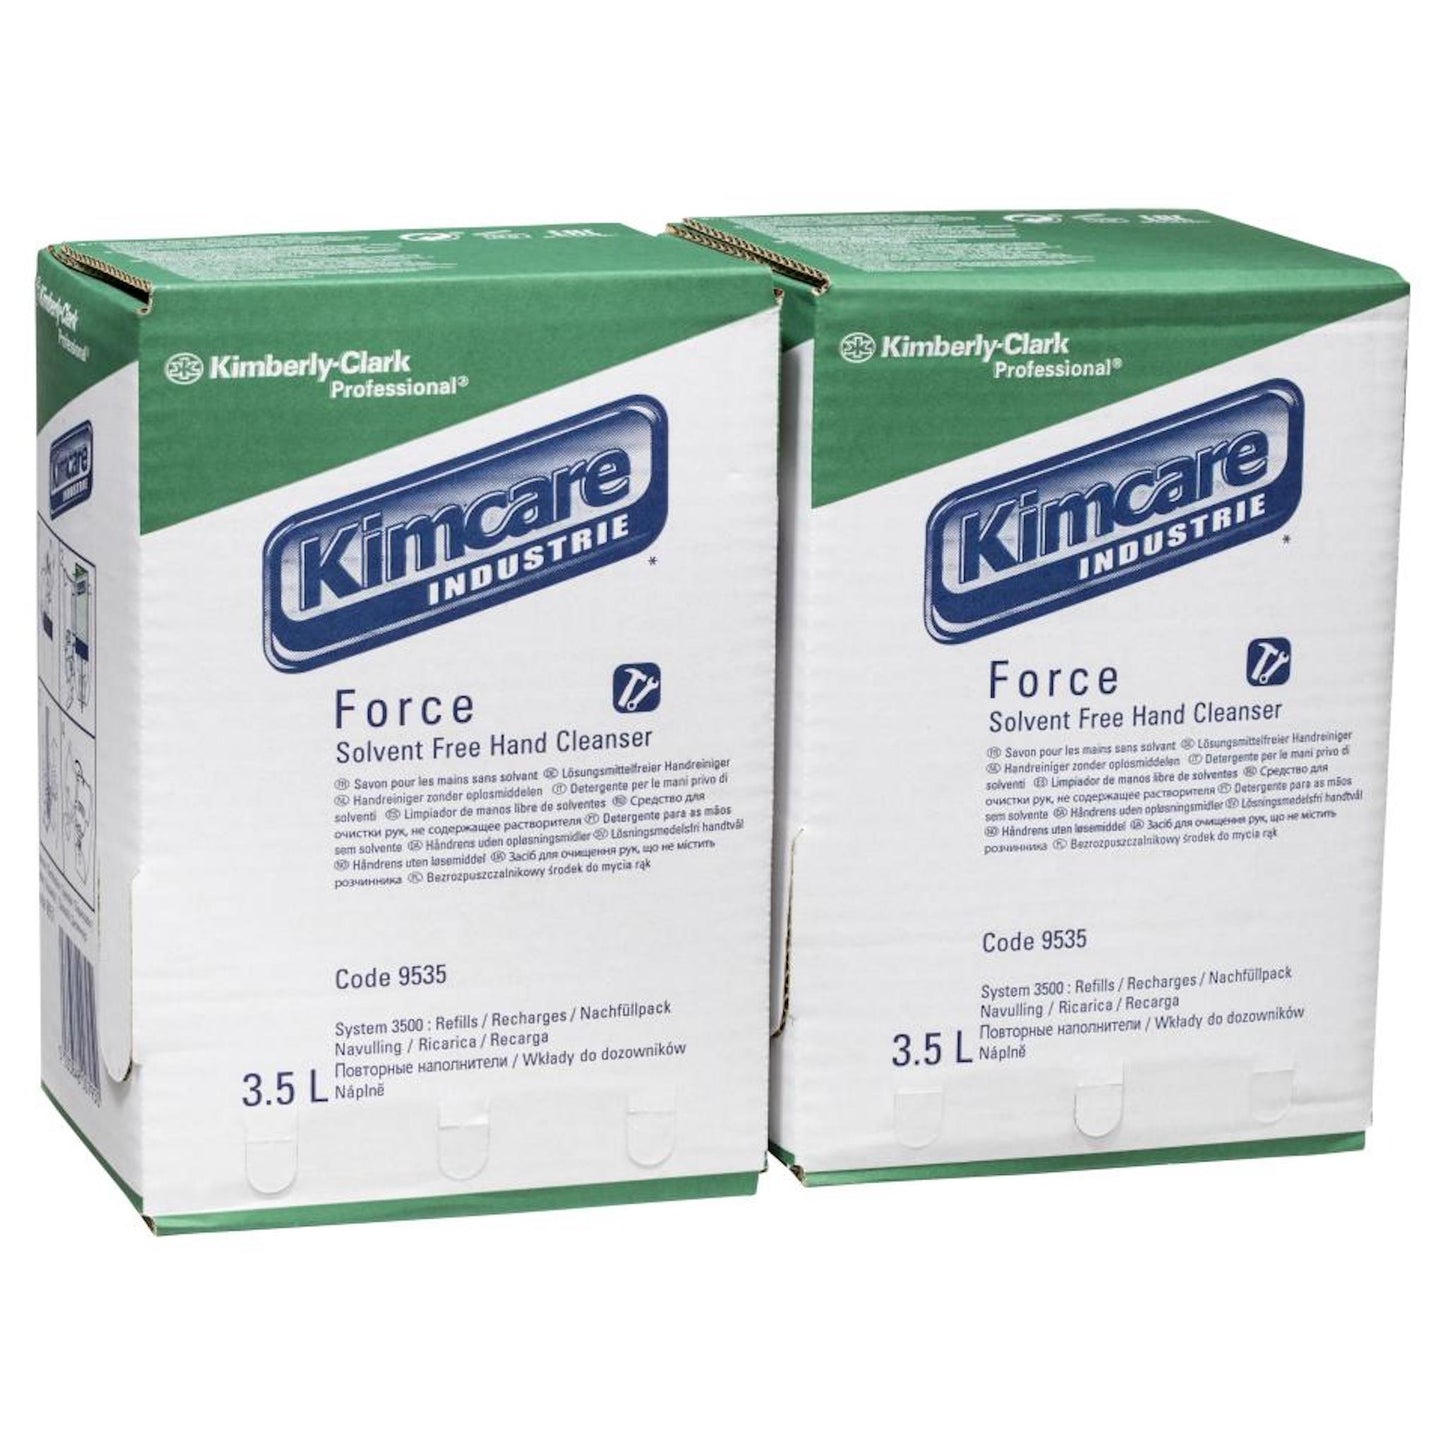 Kimcare Industrie Force 9535 Industrial Hand Cleaner Cartridges Solvent Free 3.5L Carton 2